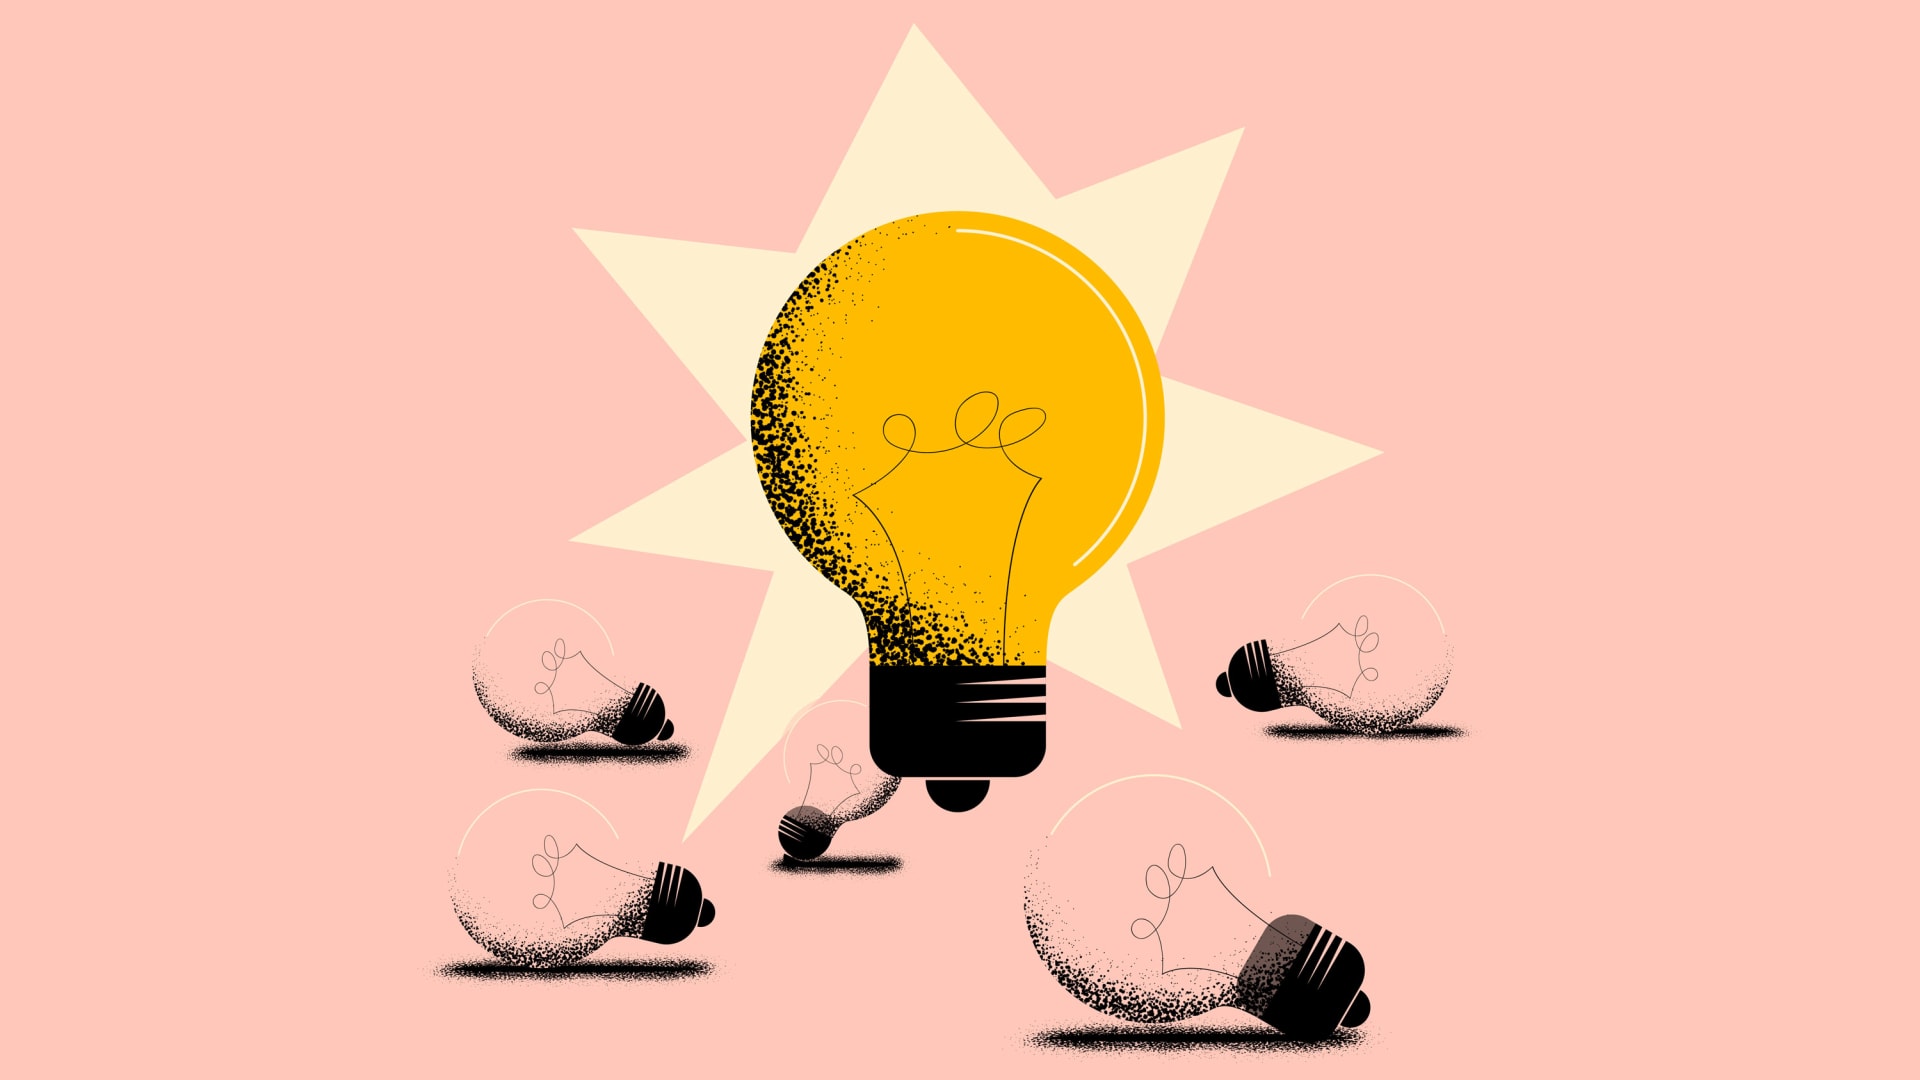 10 Questions to Help You Get Paid for Your Ideas